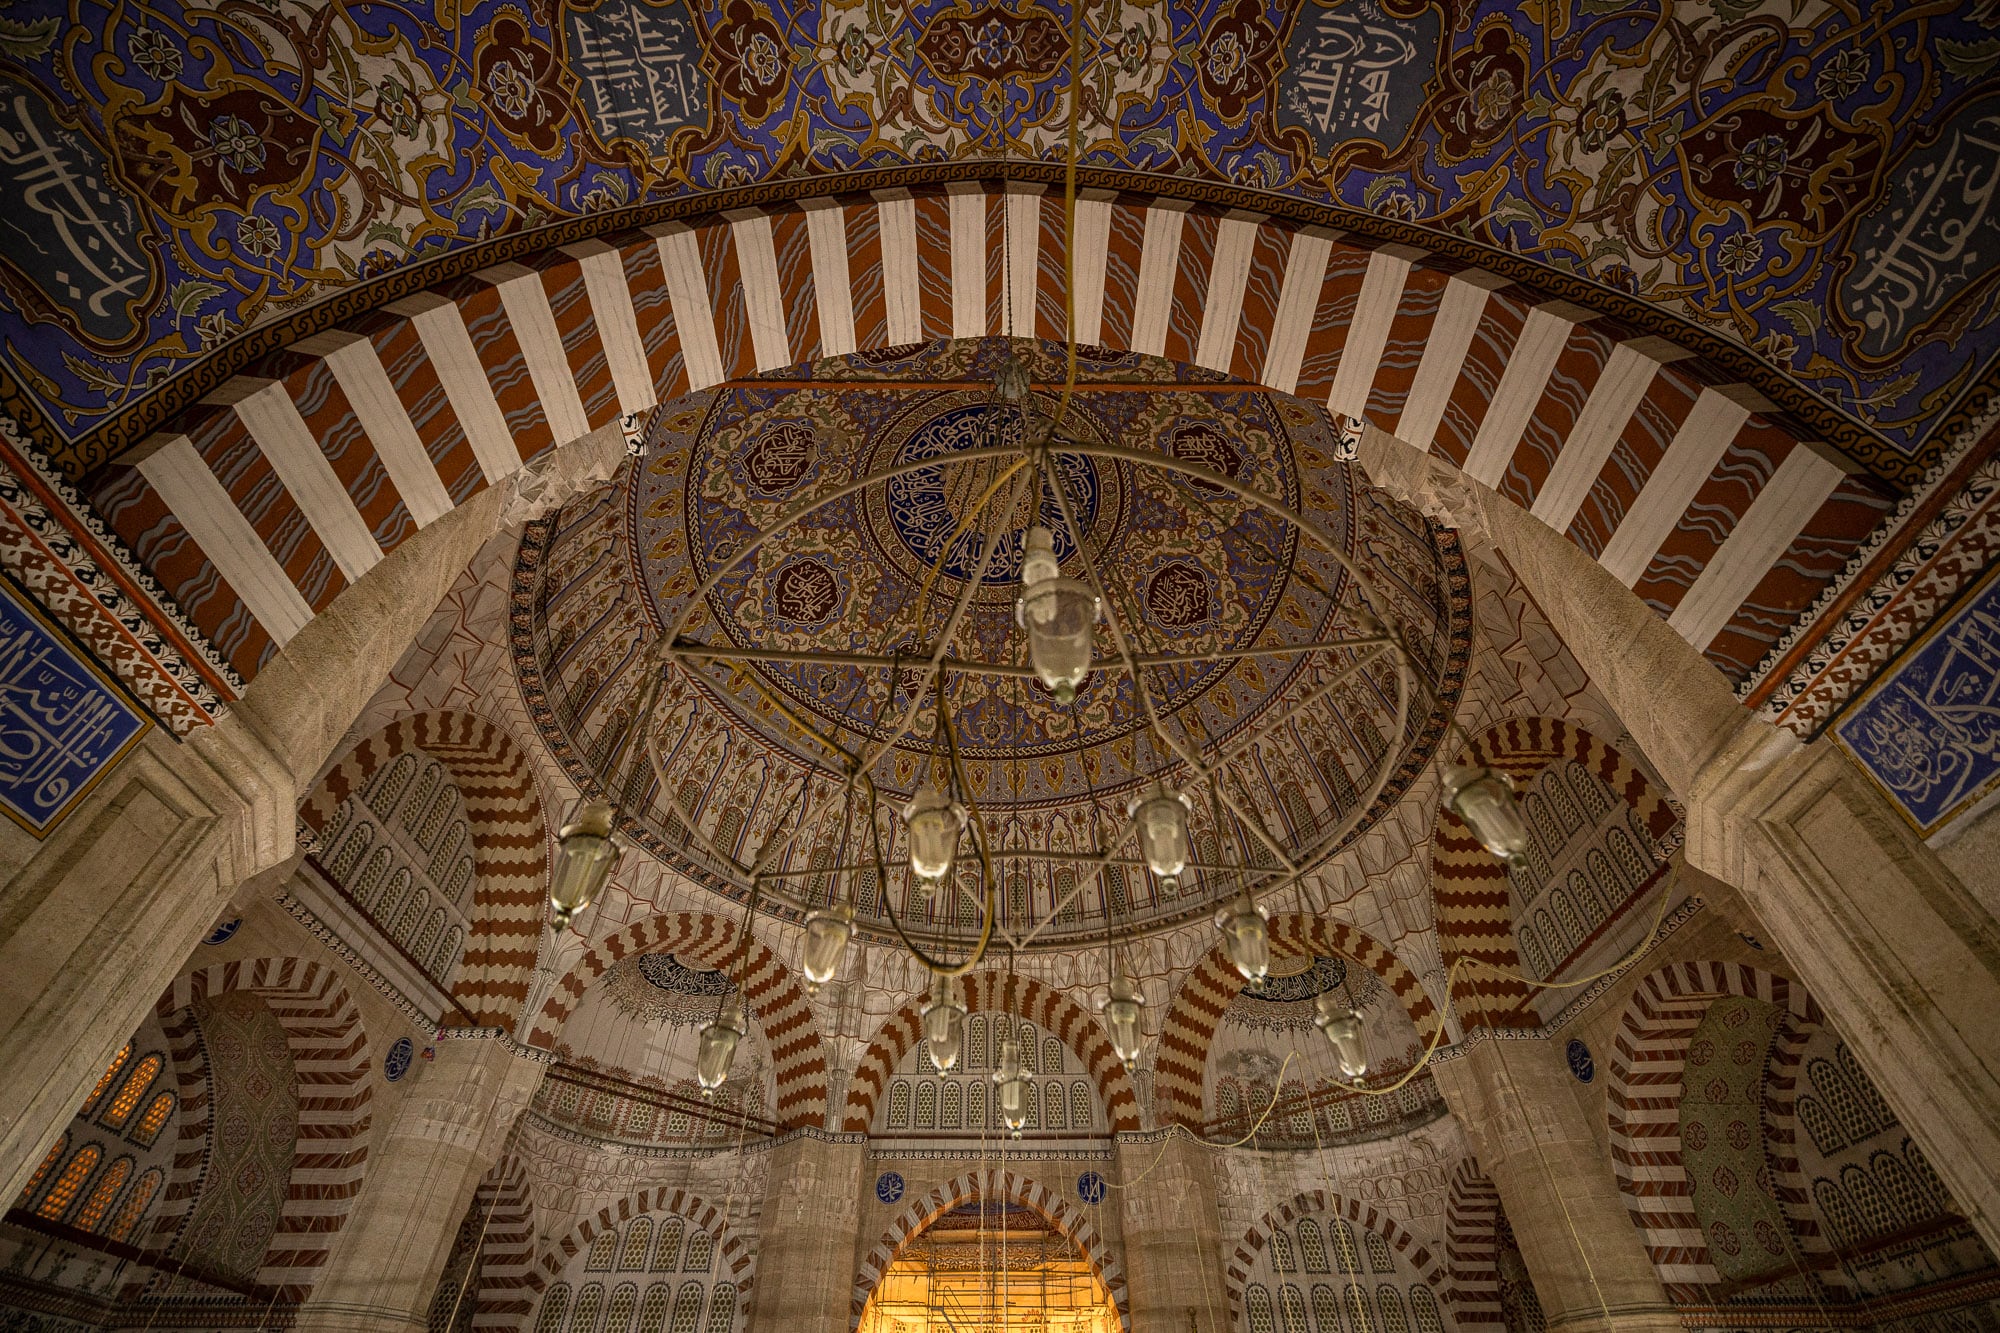 Dome of the Selimiye Mosque